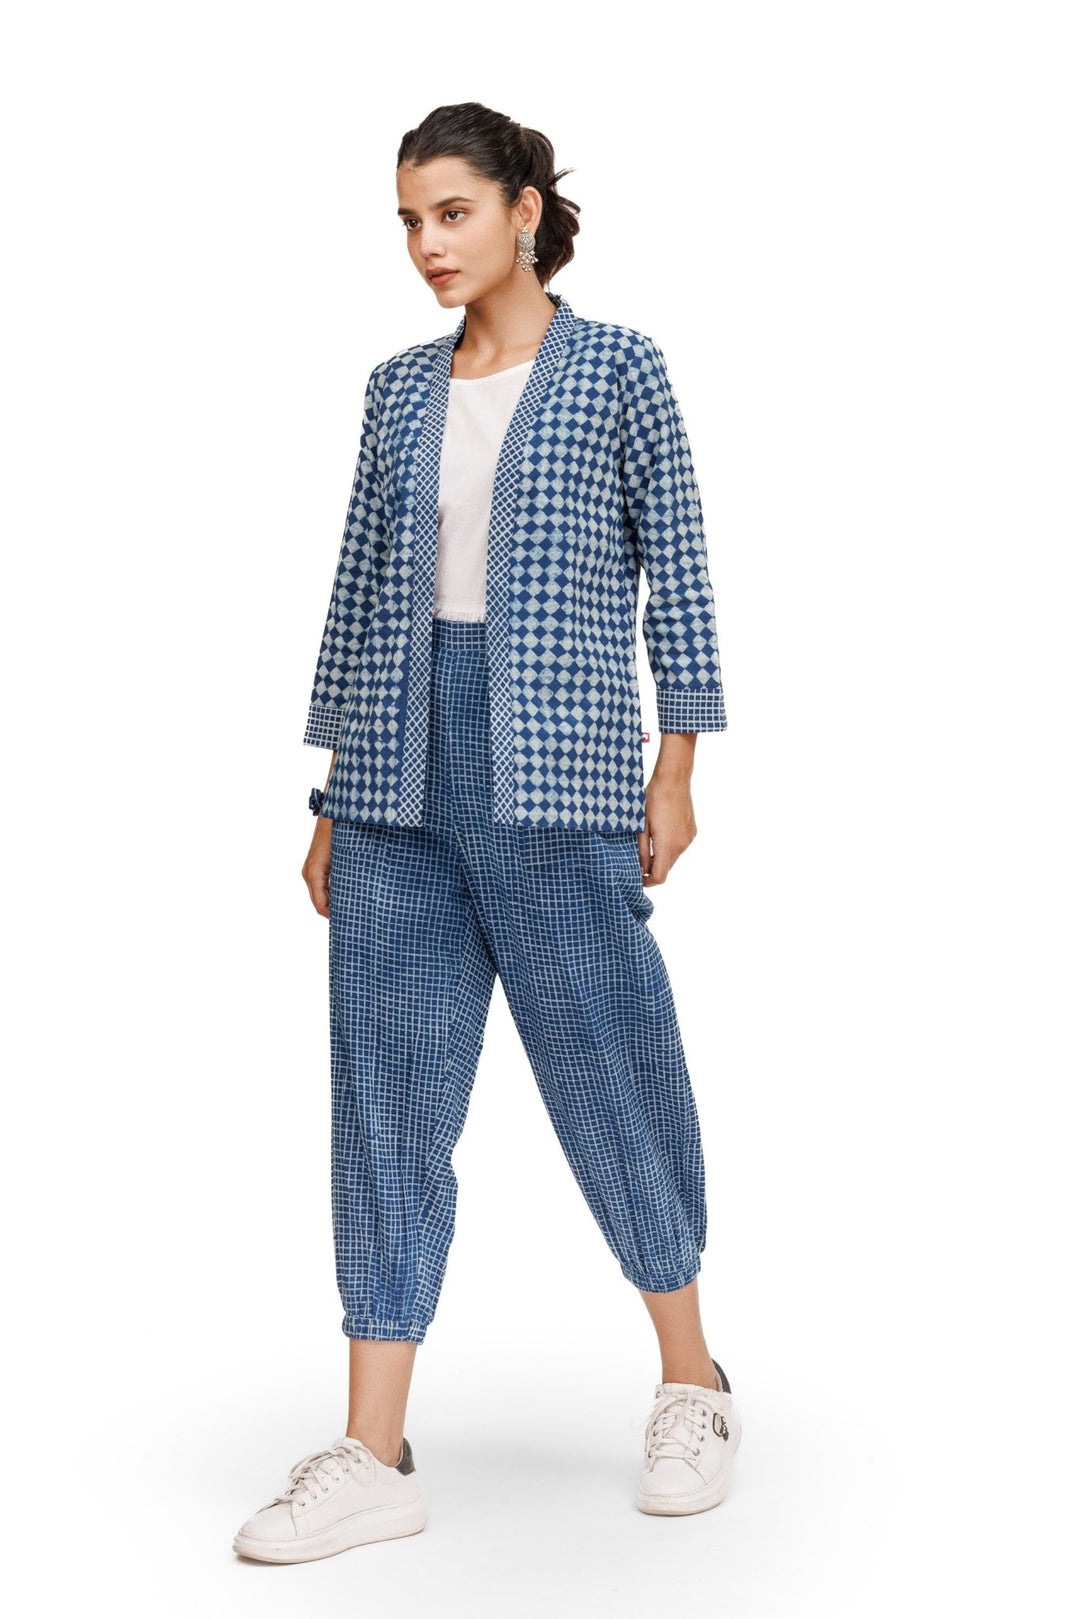 Reversable Indigo Hand Jacket with Pants and White Inner - womenswear - 1021/W/JPCT/I